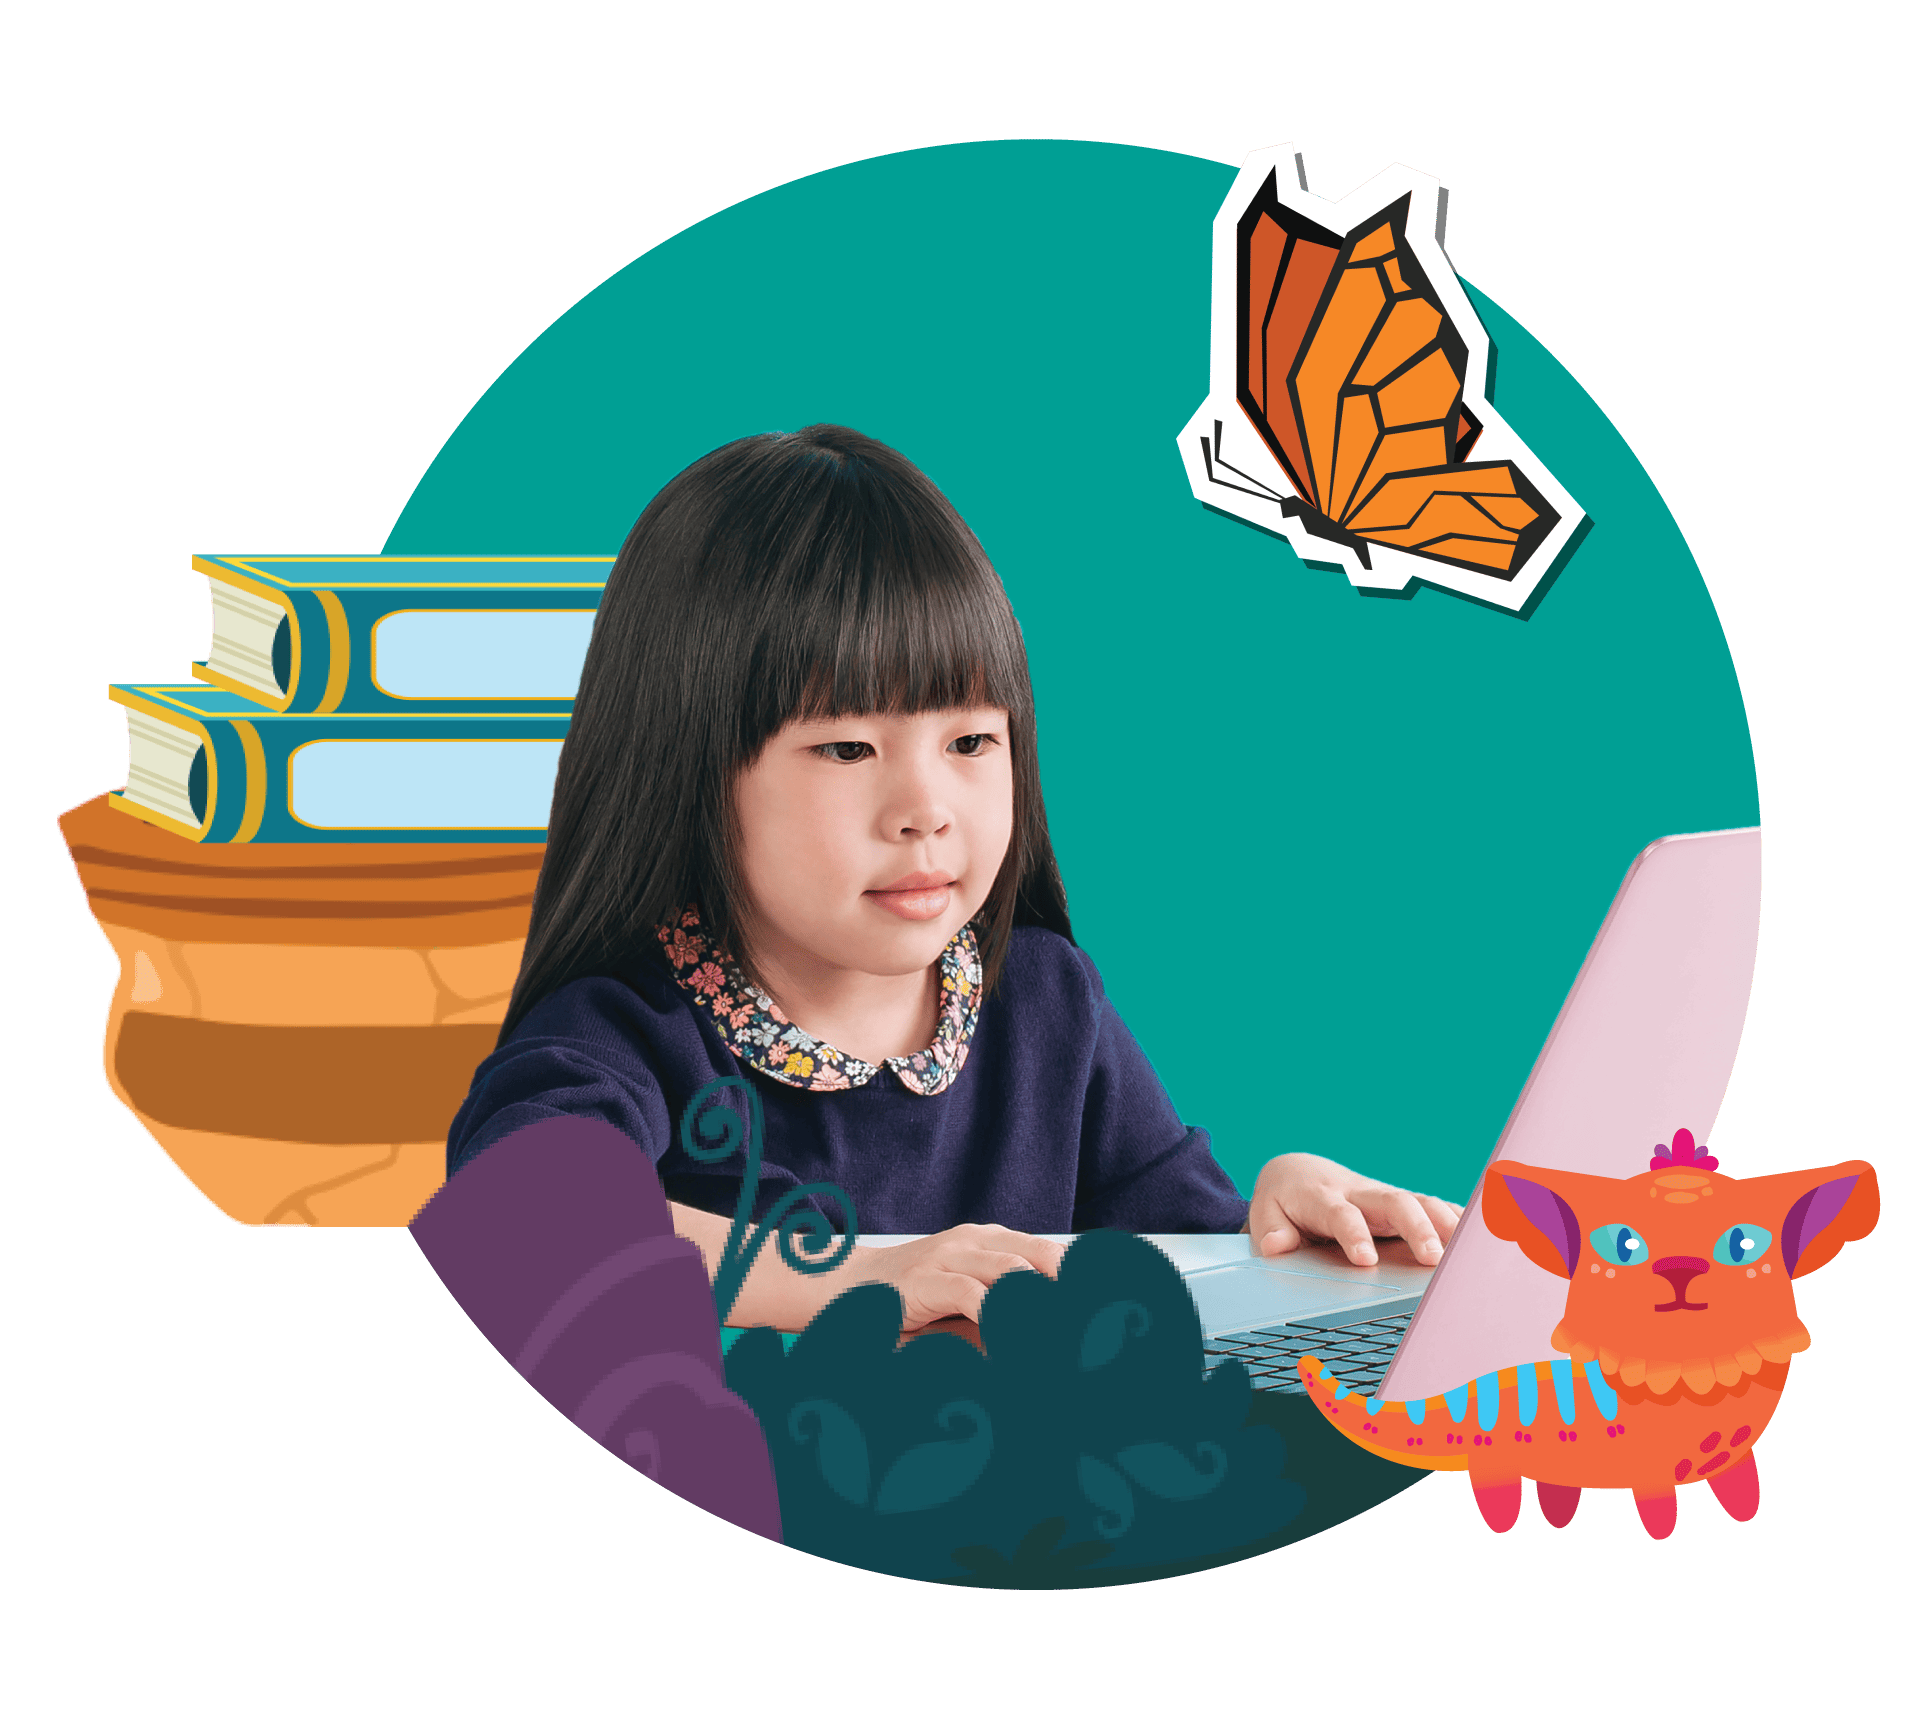 A young girl focuses on a laptop with a stack of books, a colorful creature, and autumn leaves in a stylized graphic.